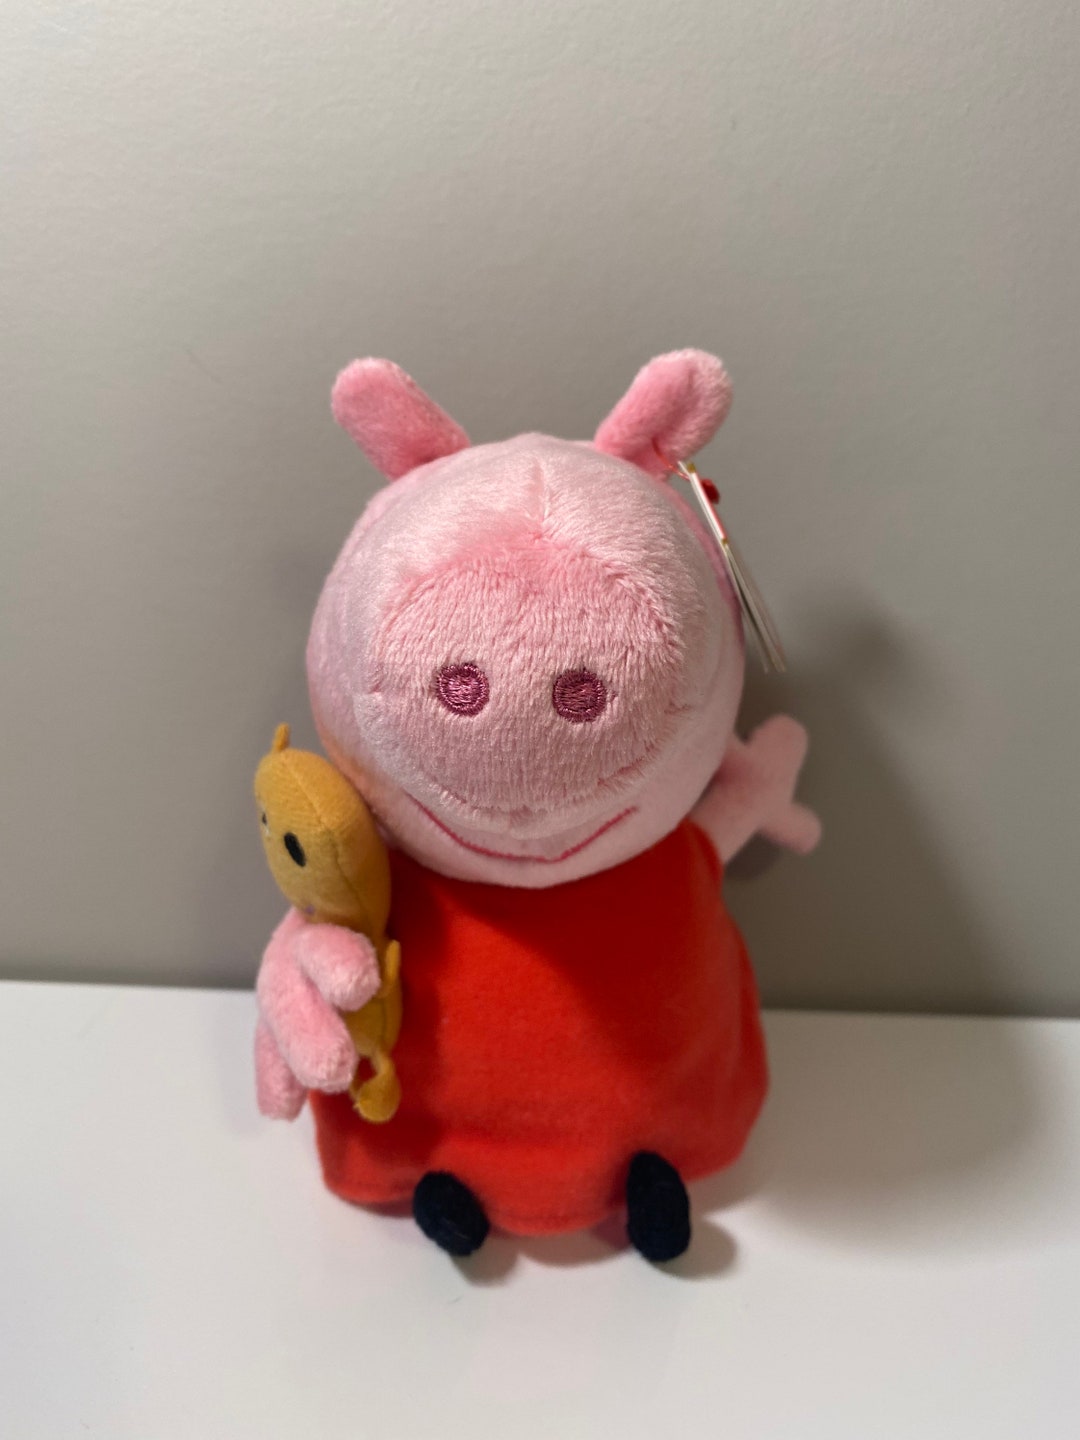 TY Beanie Baby Peppa Pig Holding Teddy Plush From the